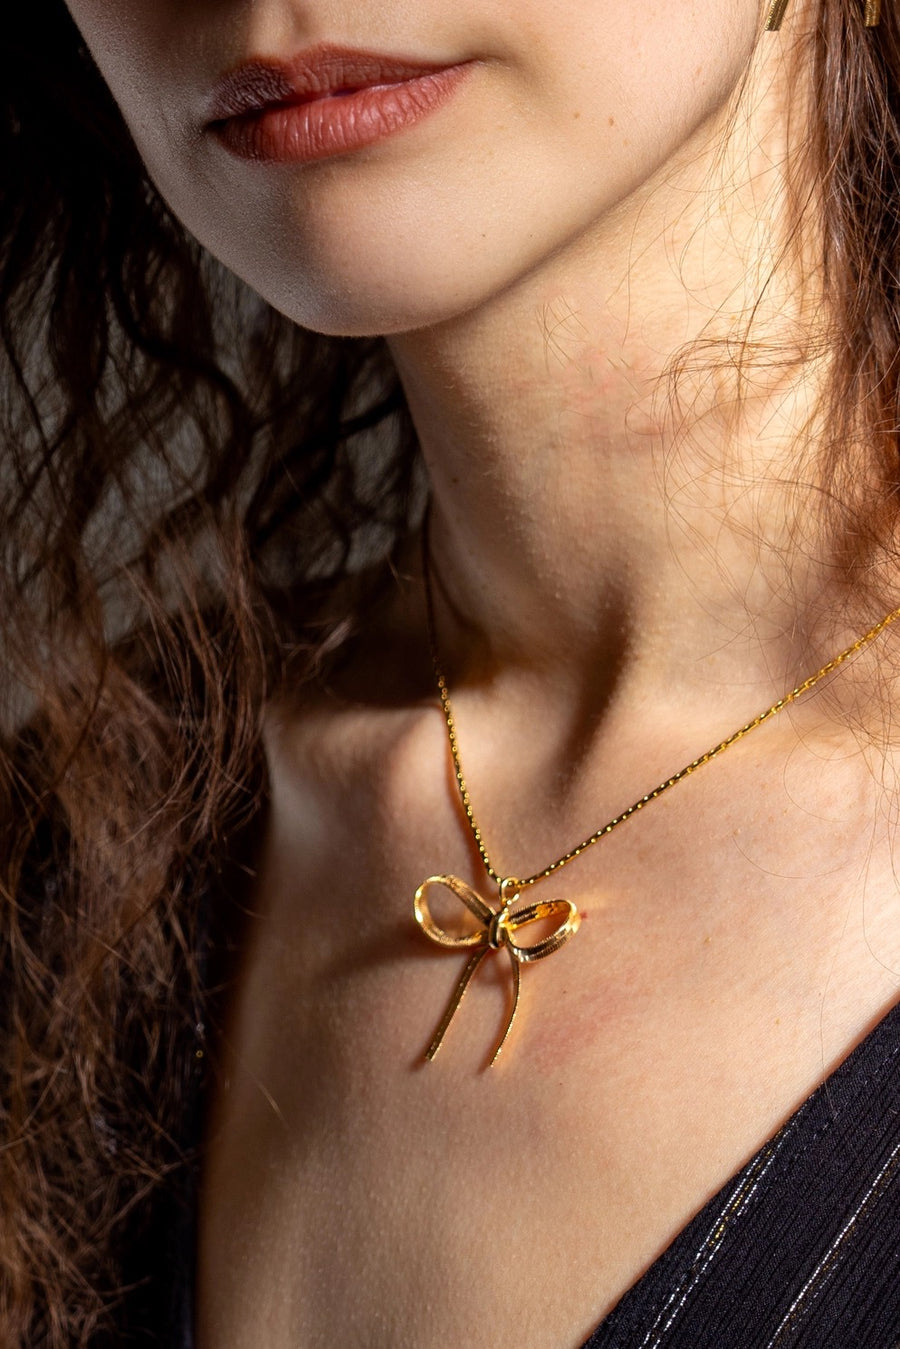 The Bow is Mine Necklace in Gold